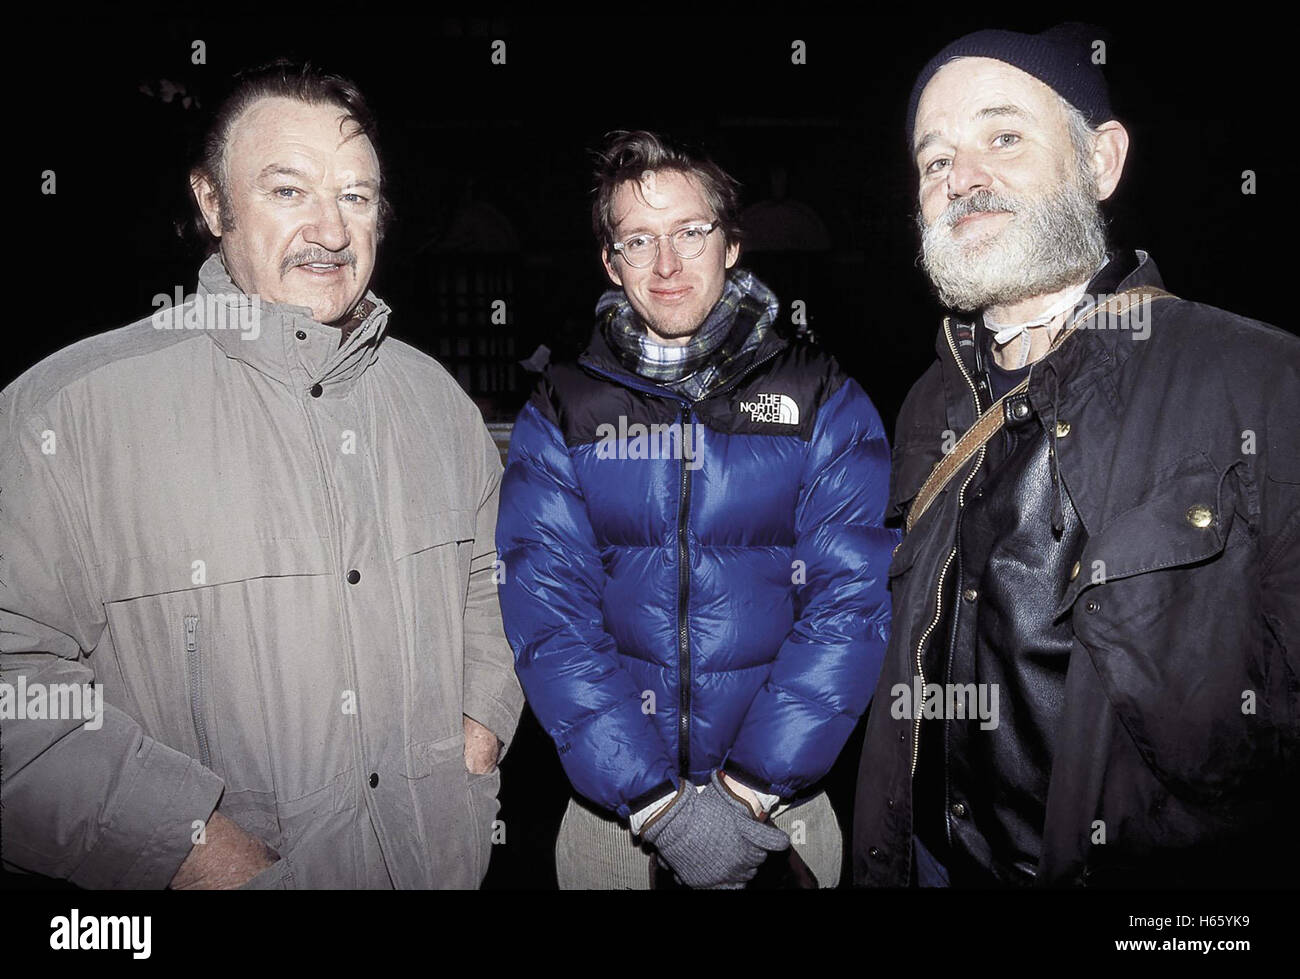 The Royal Tenenbaums, aka: Die Royal Tenenbaums, USA 2001, with the Director Wes Andersonn Bill Murray and Gene Hackman Stock Photo